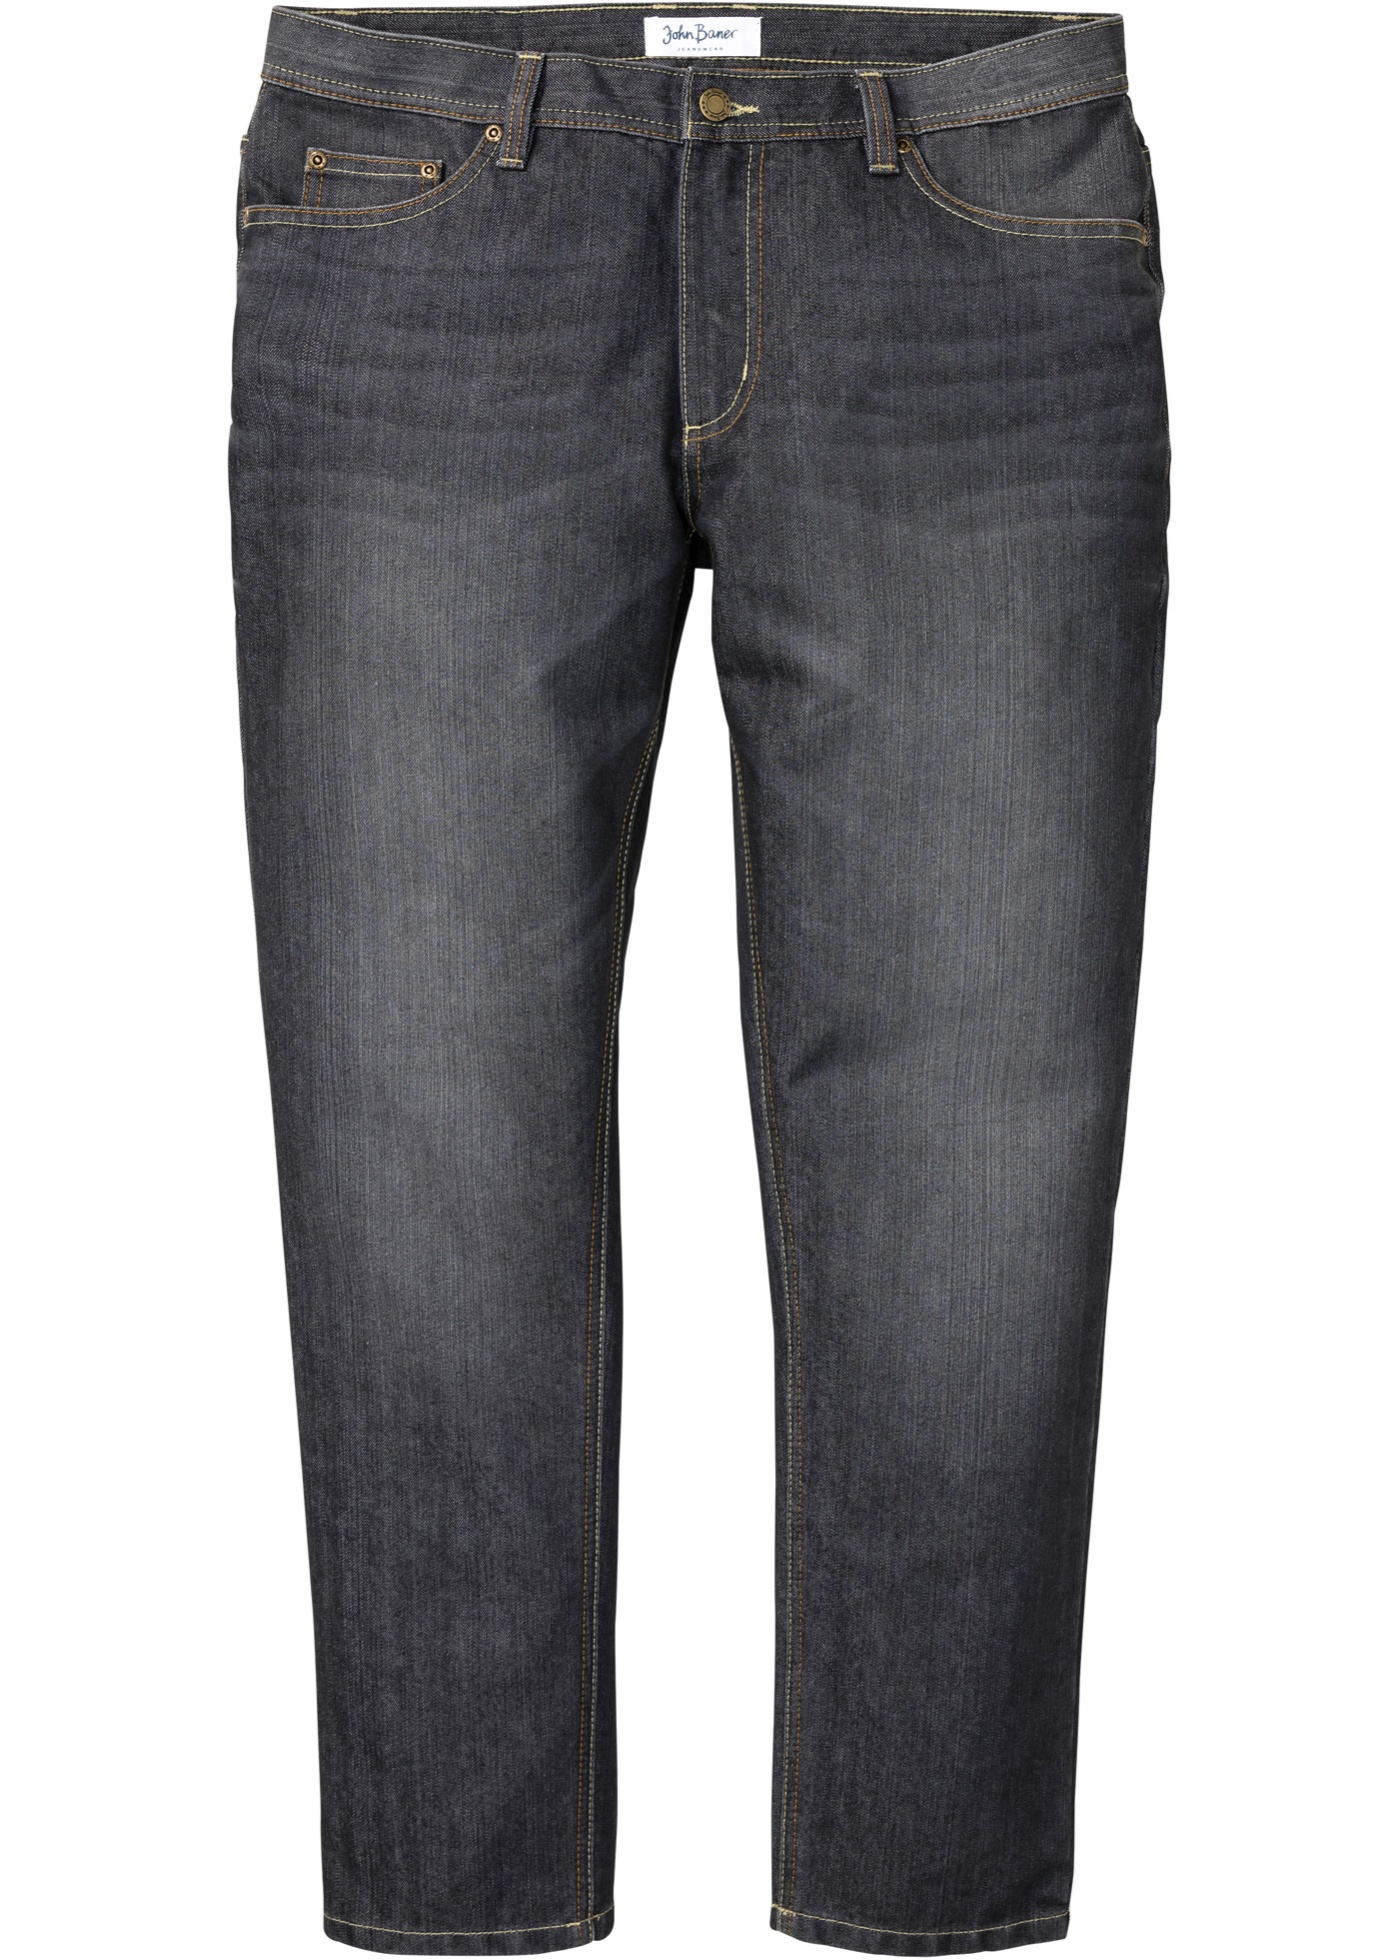 Loose fit jeans, tapered